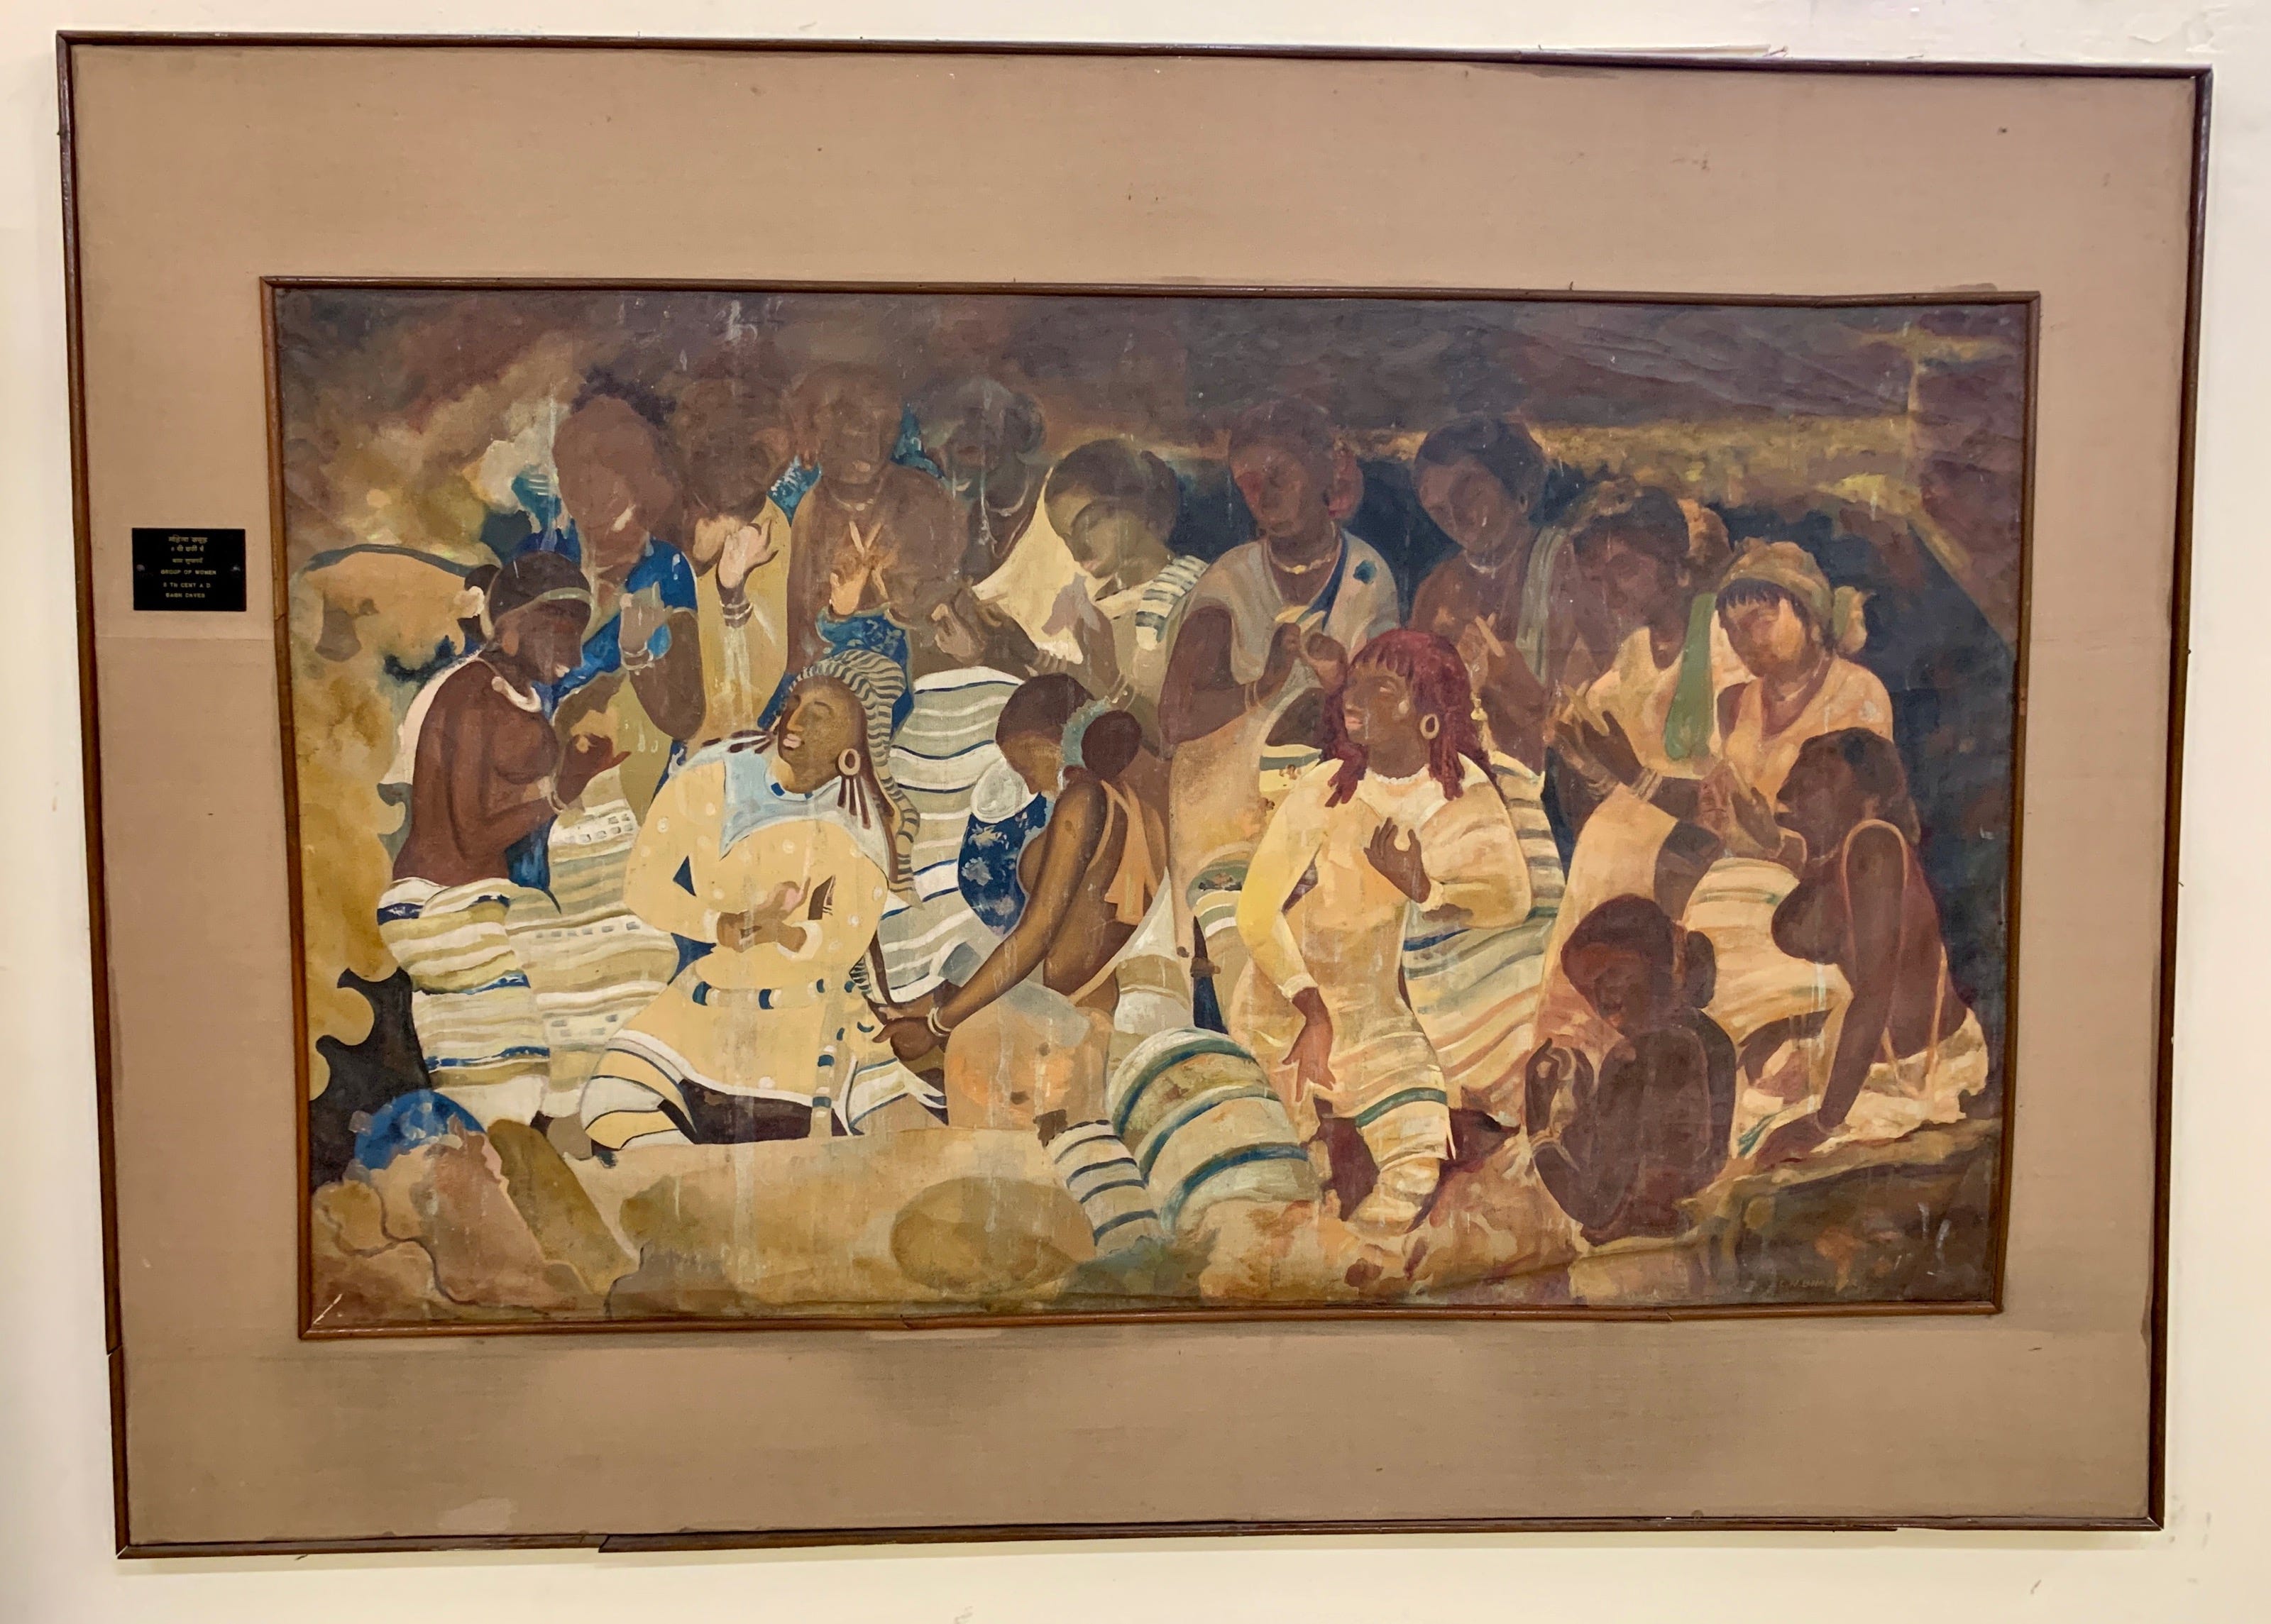 A painting showing a dozen ancient women in a cave in various positions, presumably a snapshot of the folk dance being depicted.